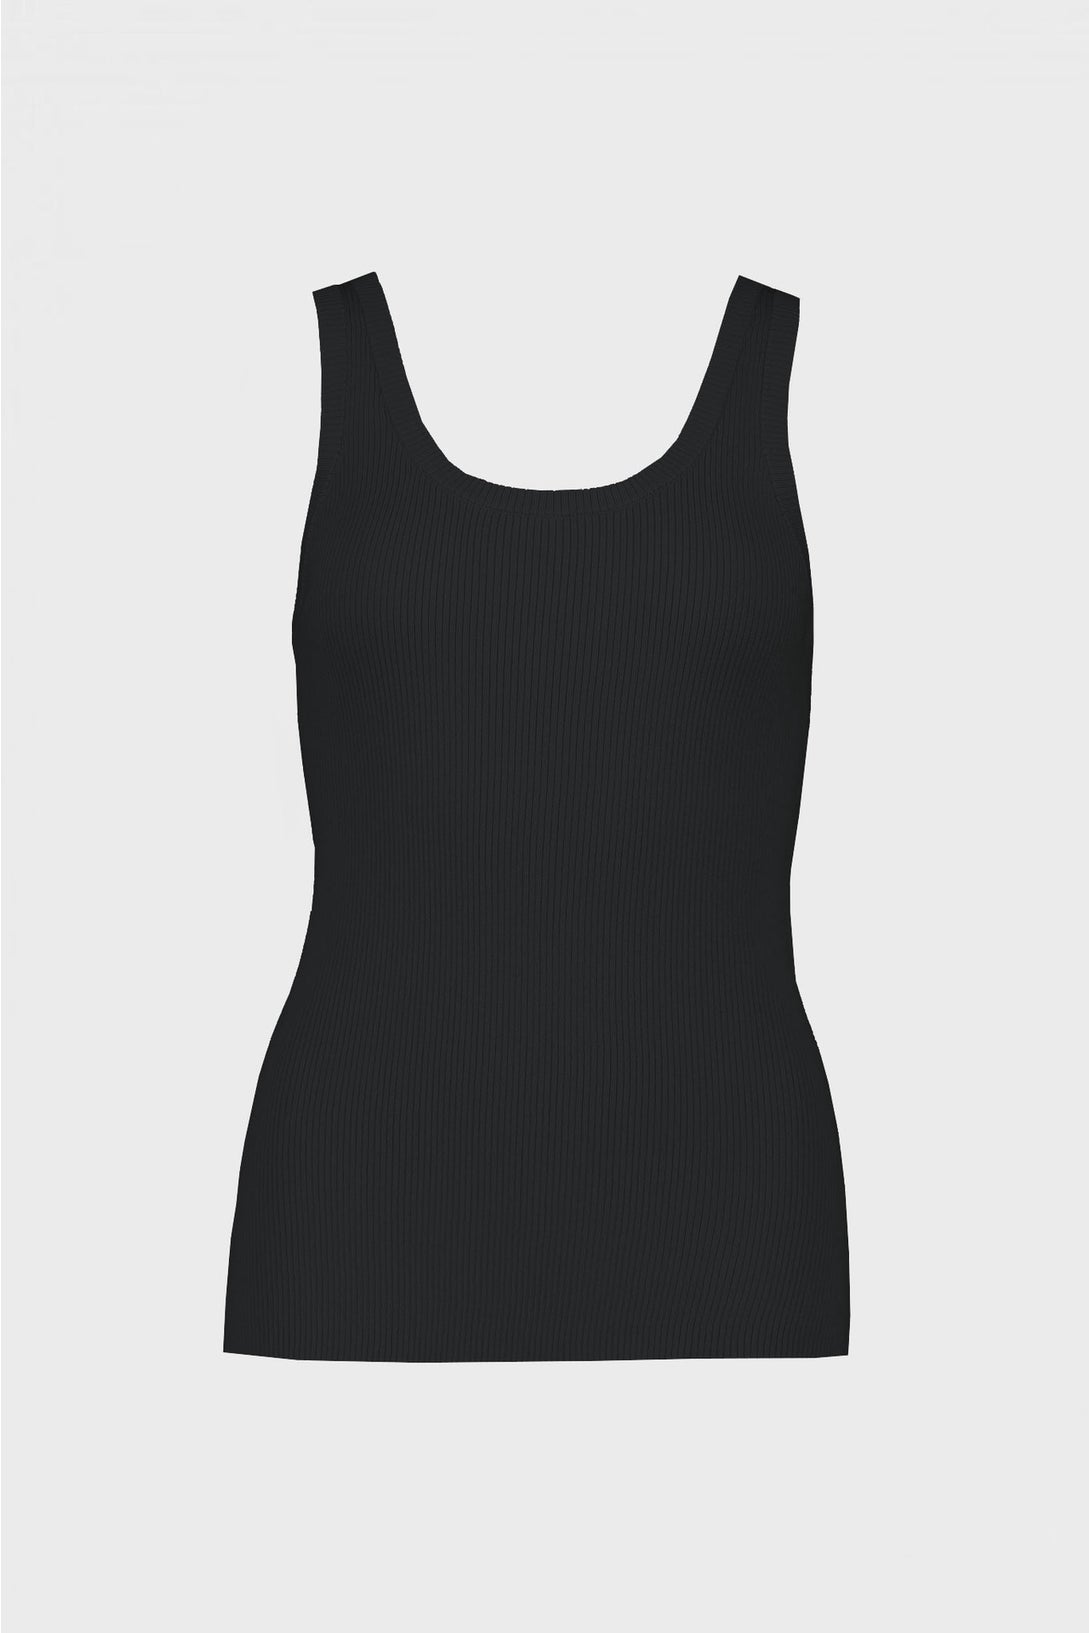 https://www.theshelteronline.com/content/products/Evident-Tank-Black-1-Grey.jpg?canvas=2:3&width=1088